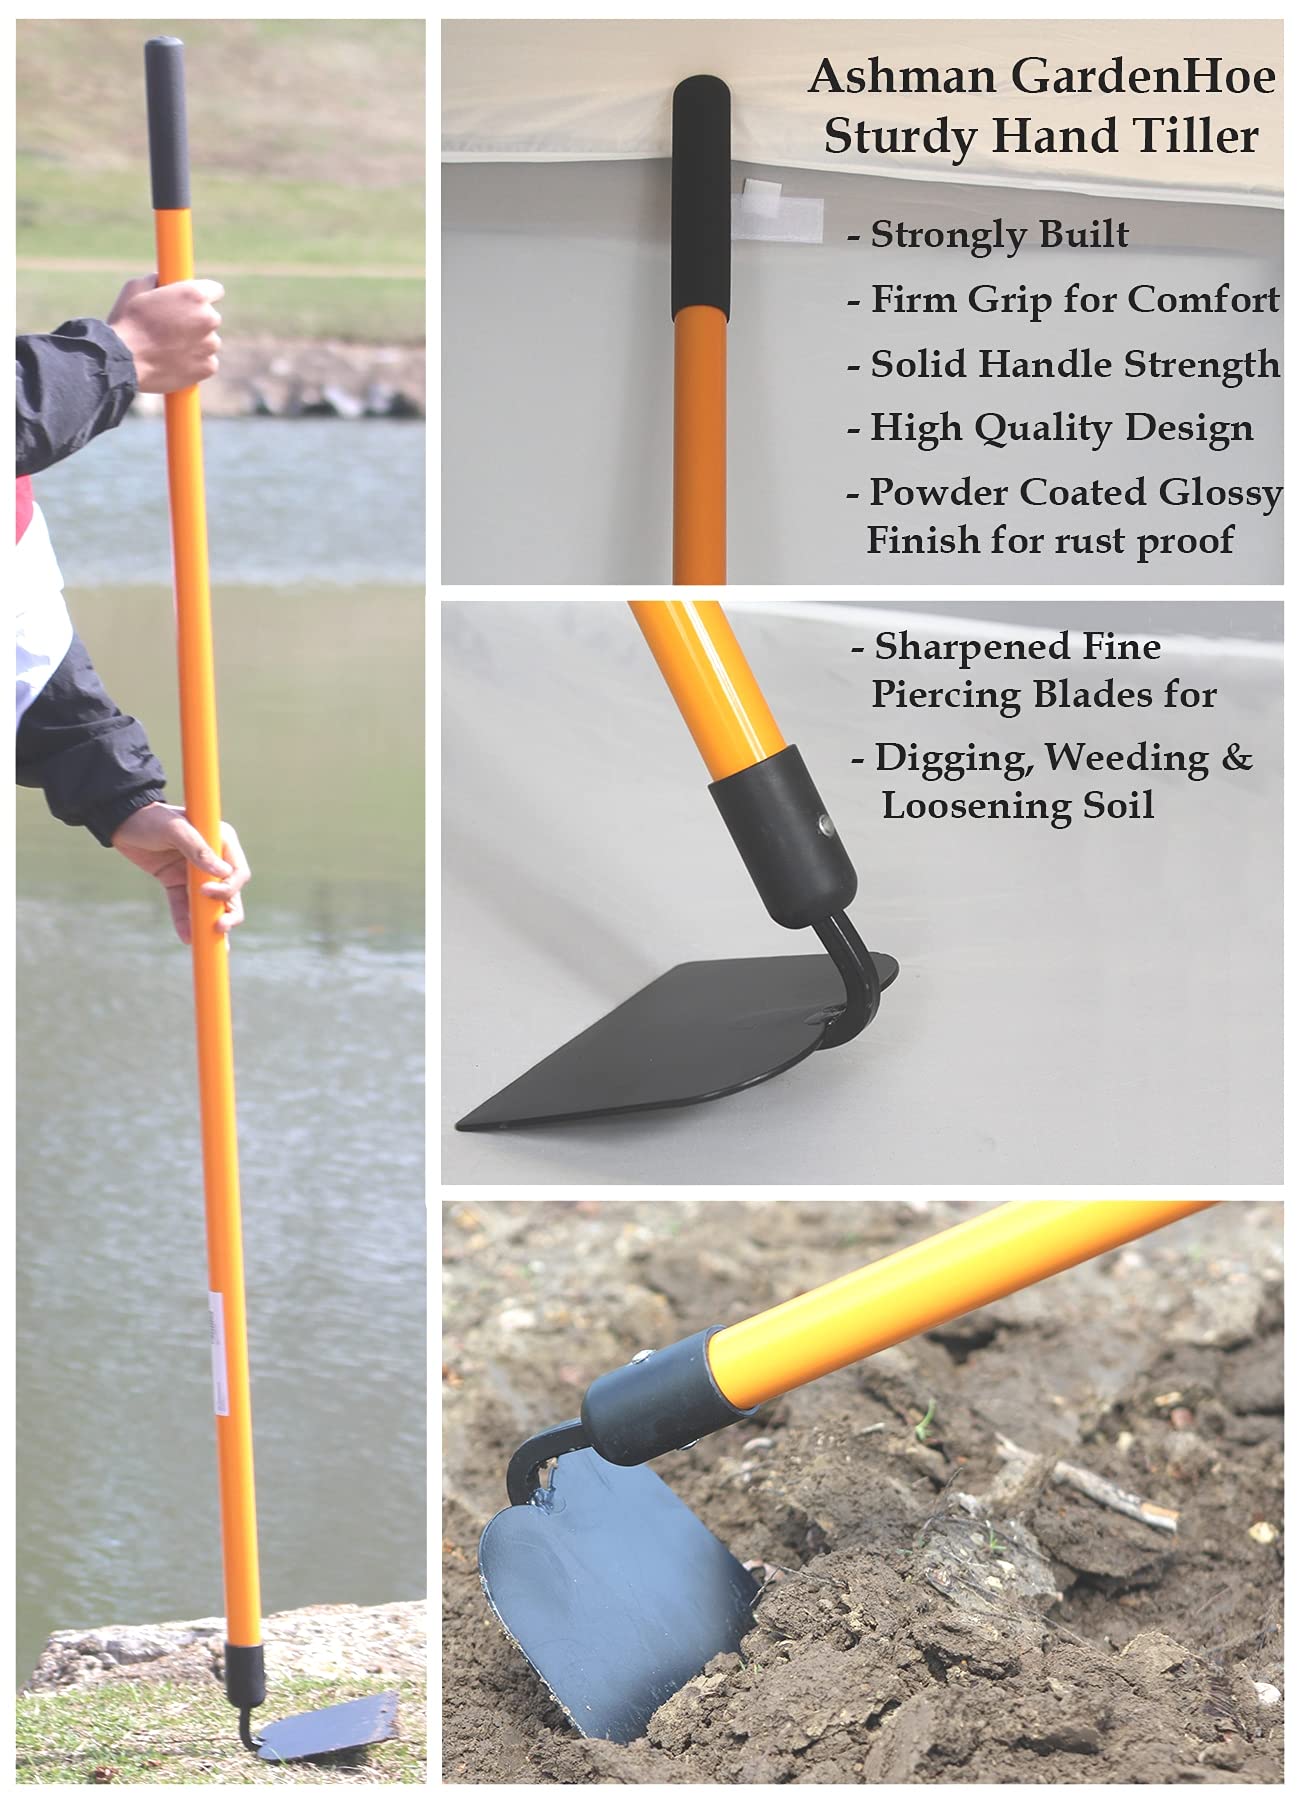 Ashman Garden Hoe (1 Pack)– Sturdy Hand Tiller – Heavy Duty Blade for Digging, Loosening Soil, and Weeding – Rubber Grip Handle for a Strong Hold – Rust Resistant Build.